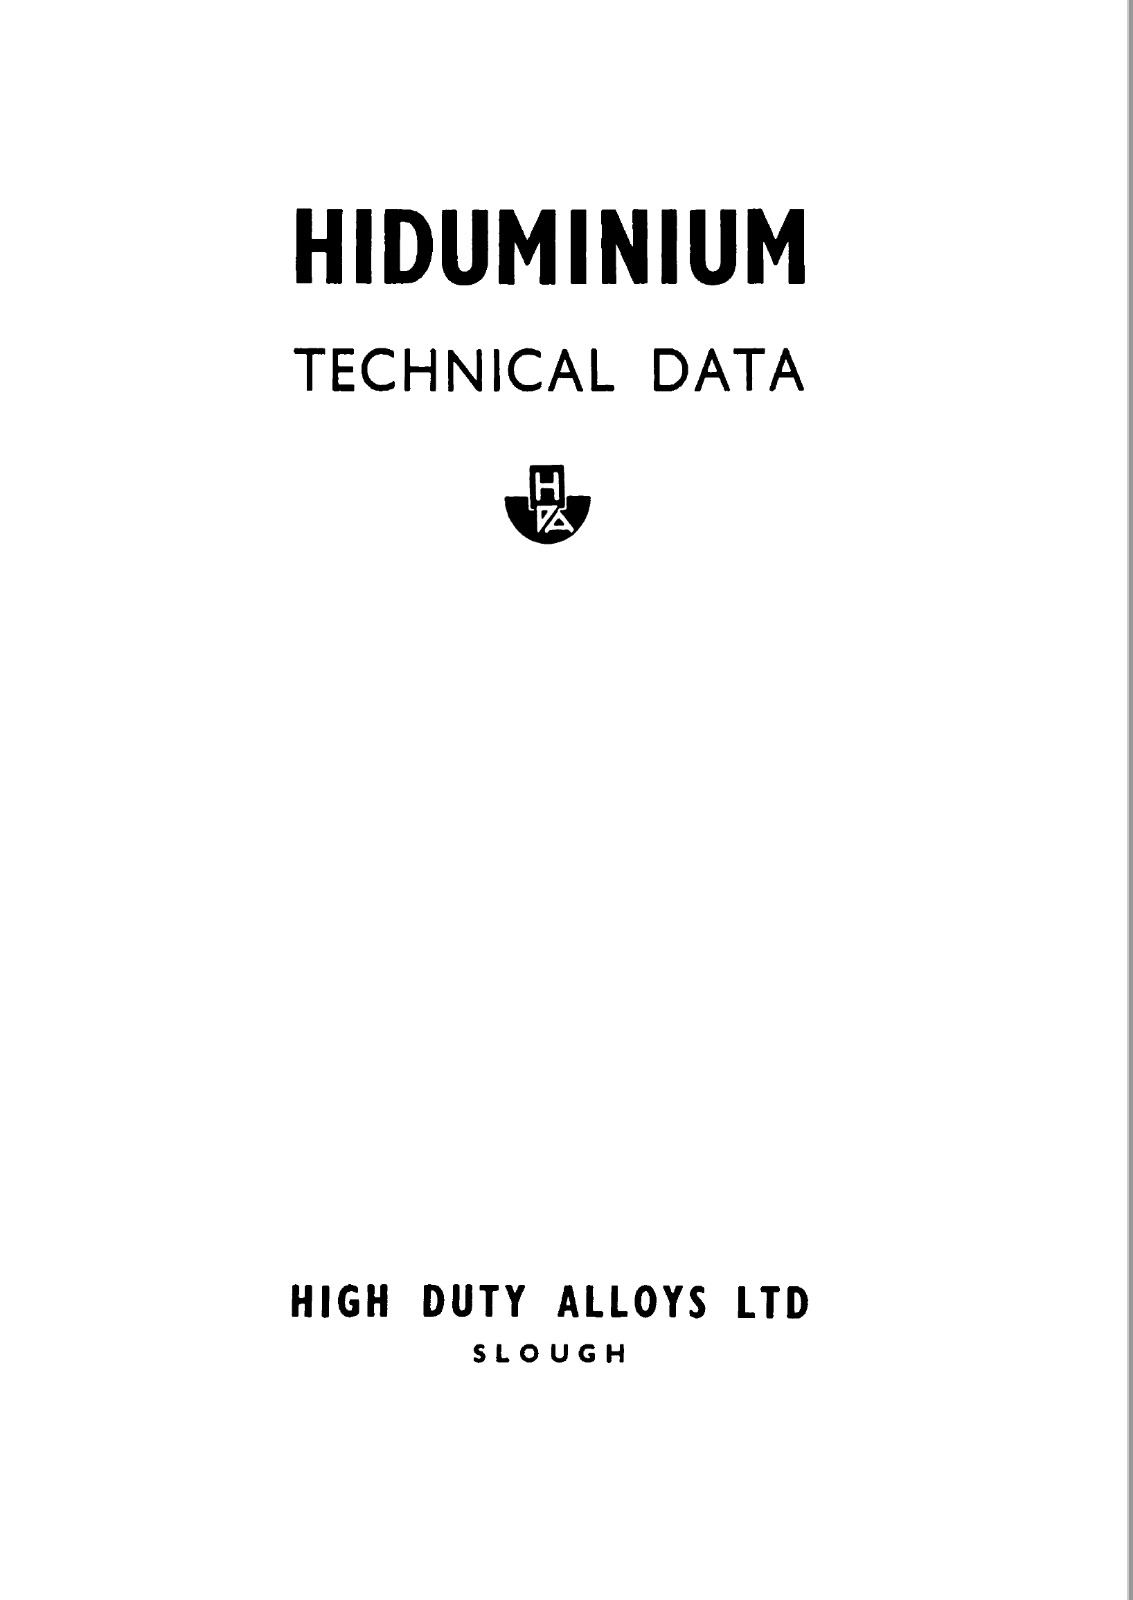 44 Page WWII HIDUMINIUM DTD TECHNICAL DATA BRITSH AIRCRAFT SPECS Manual on CD